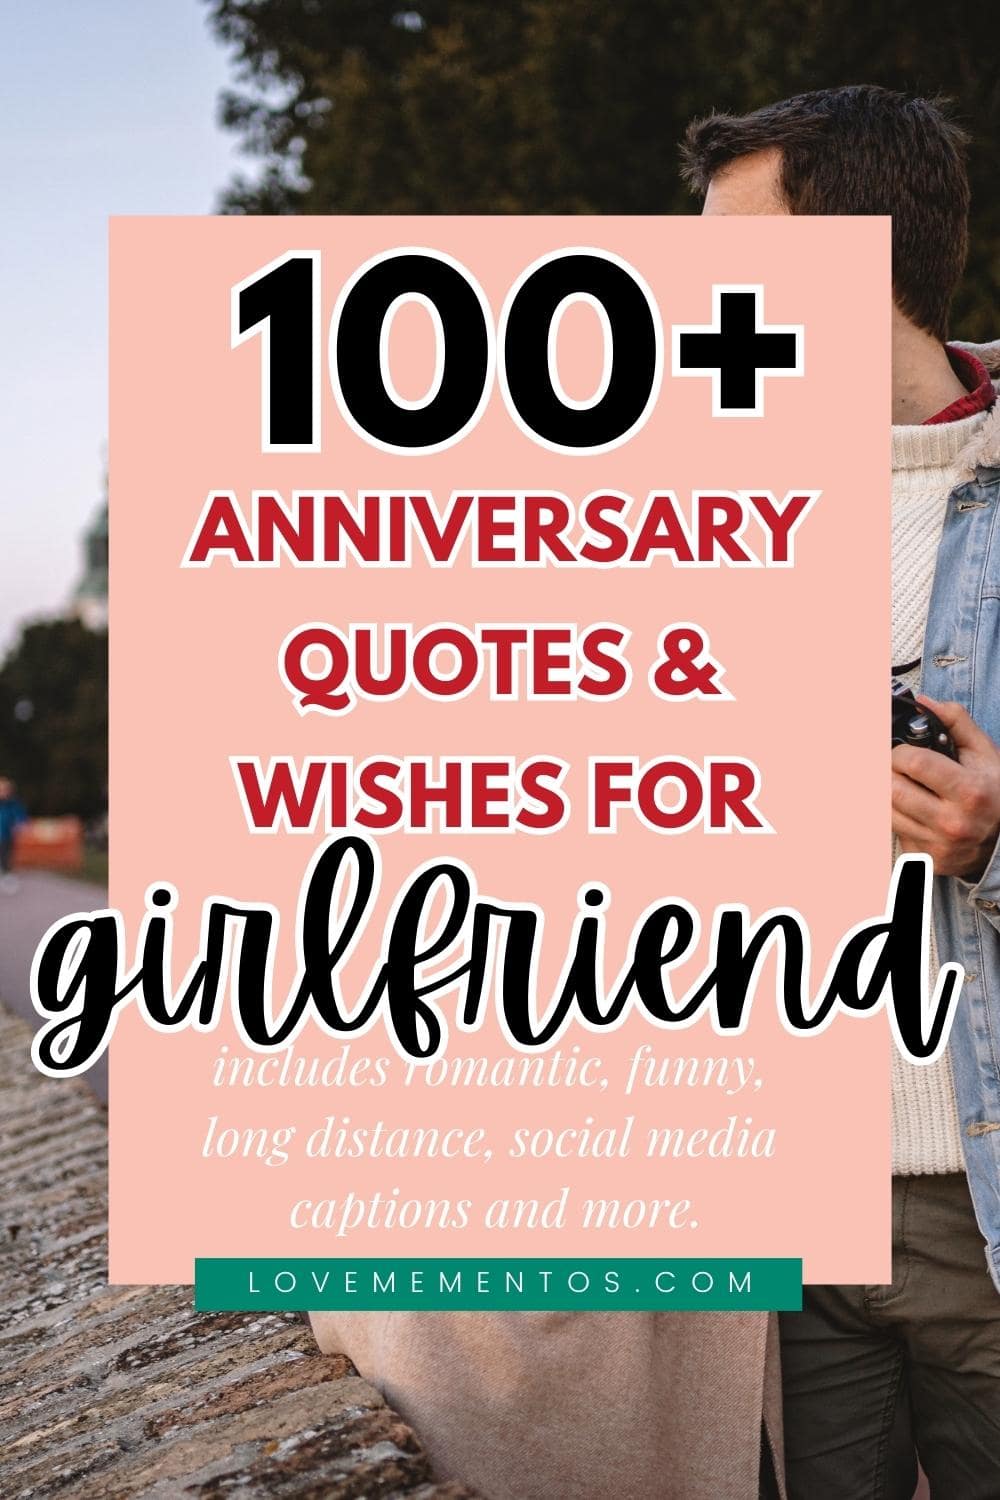 Best Anniversary Quotes & Wishes for Your Girlfriend - Love Mementos